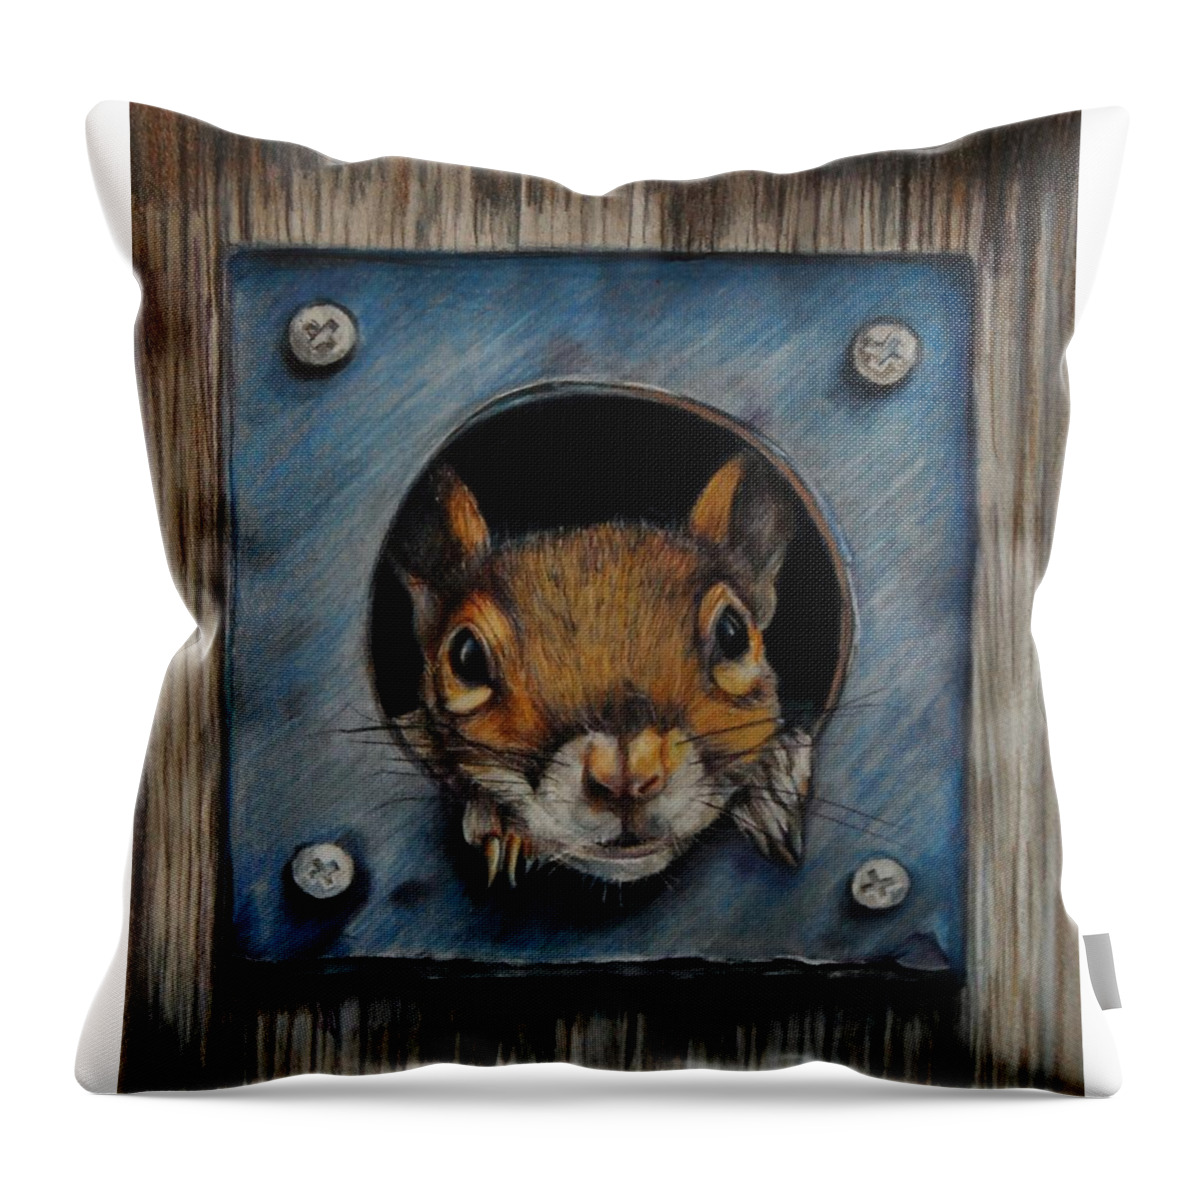 Squirrel Throw Pillow featuring the drawing Just Hanging Out by Jean Cormier